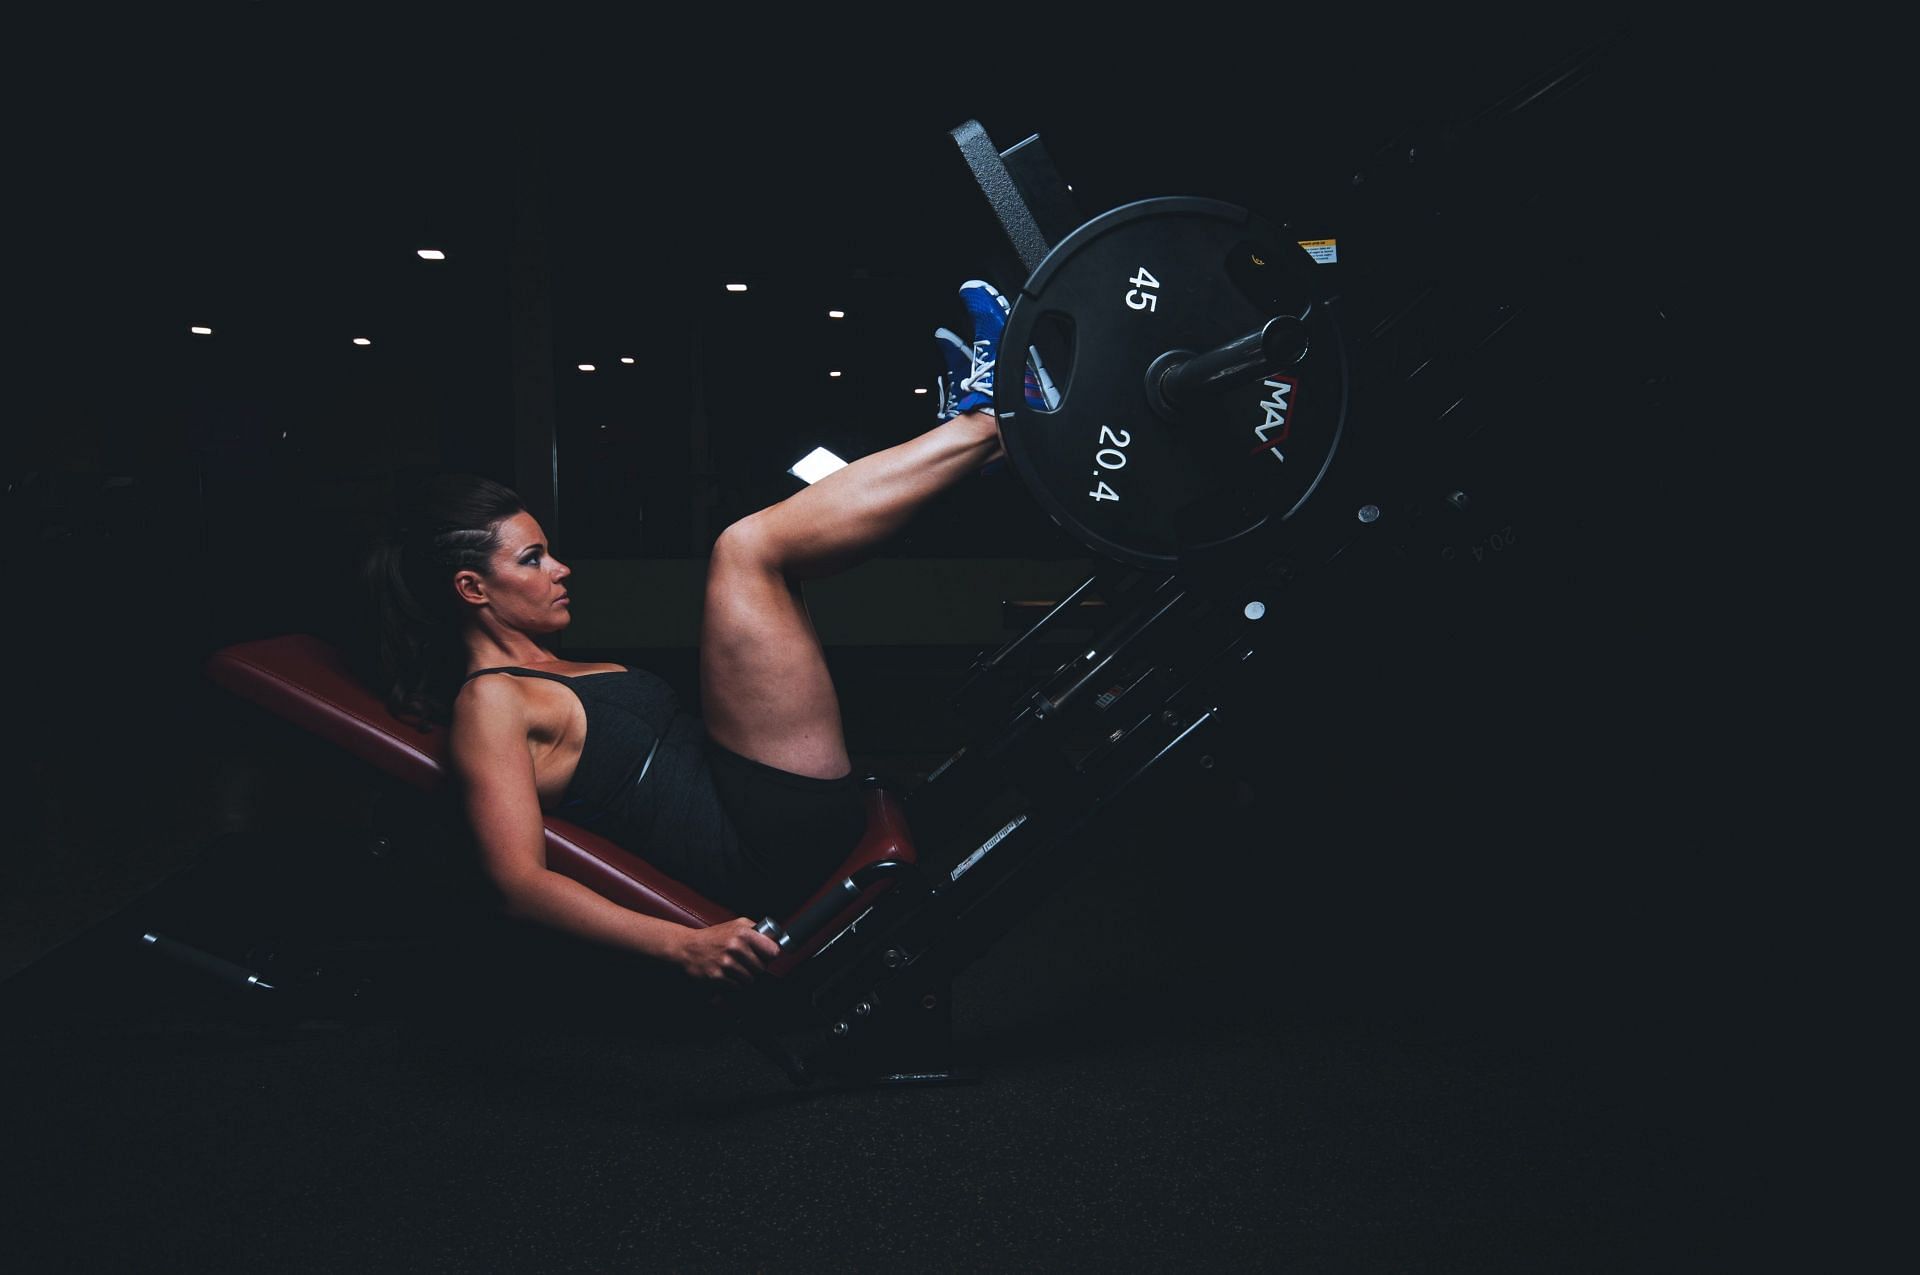 The calf press machine is utilized as a part of machine circuit workout or routine for strengthening the legs. (Image via Unsplash/Scott Webb)